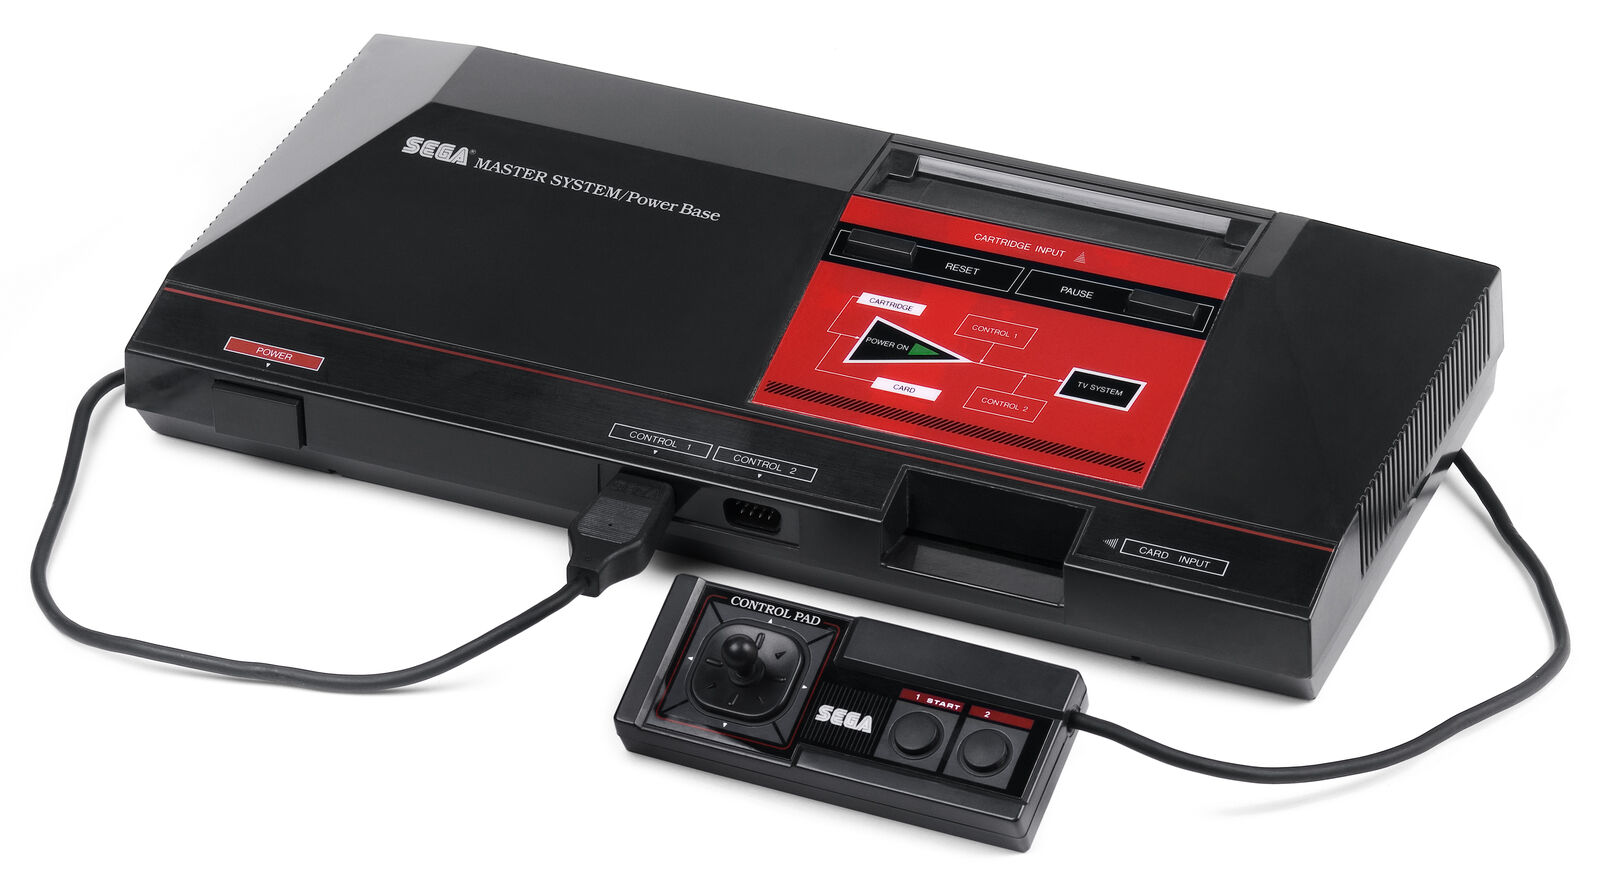 The Sega Master System home console and controller.